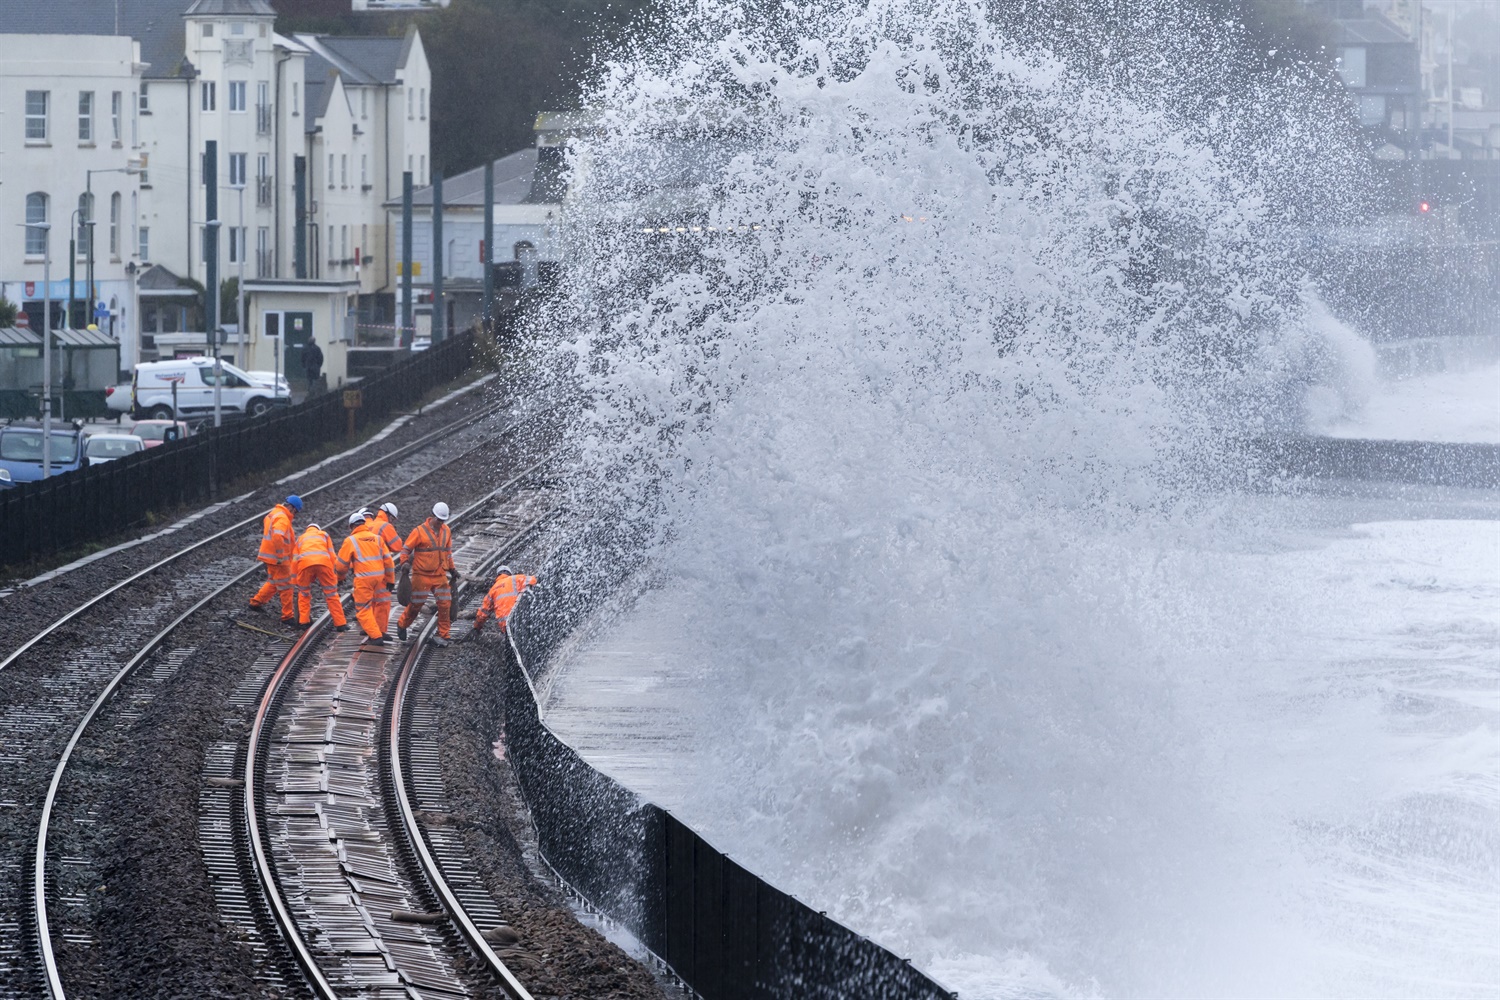 Long-awaited plans to build a sea wall to protect Dawlish rail line unveiled by Network Rail